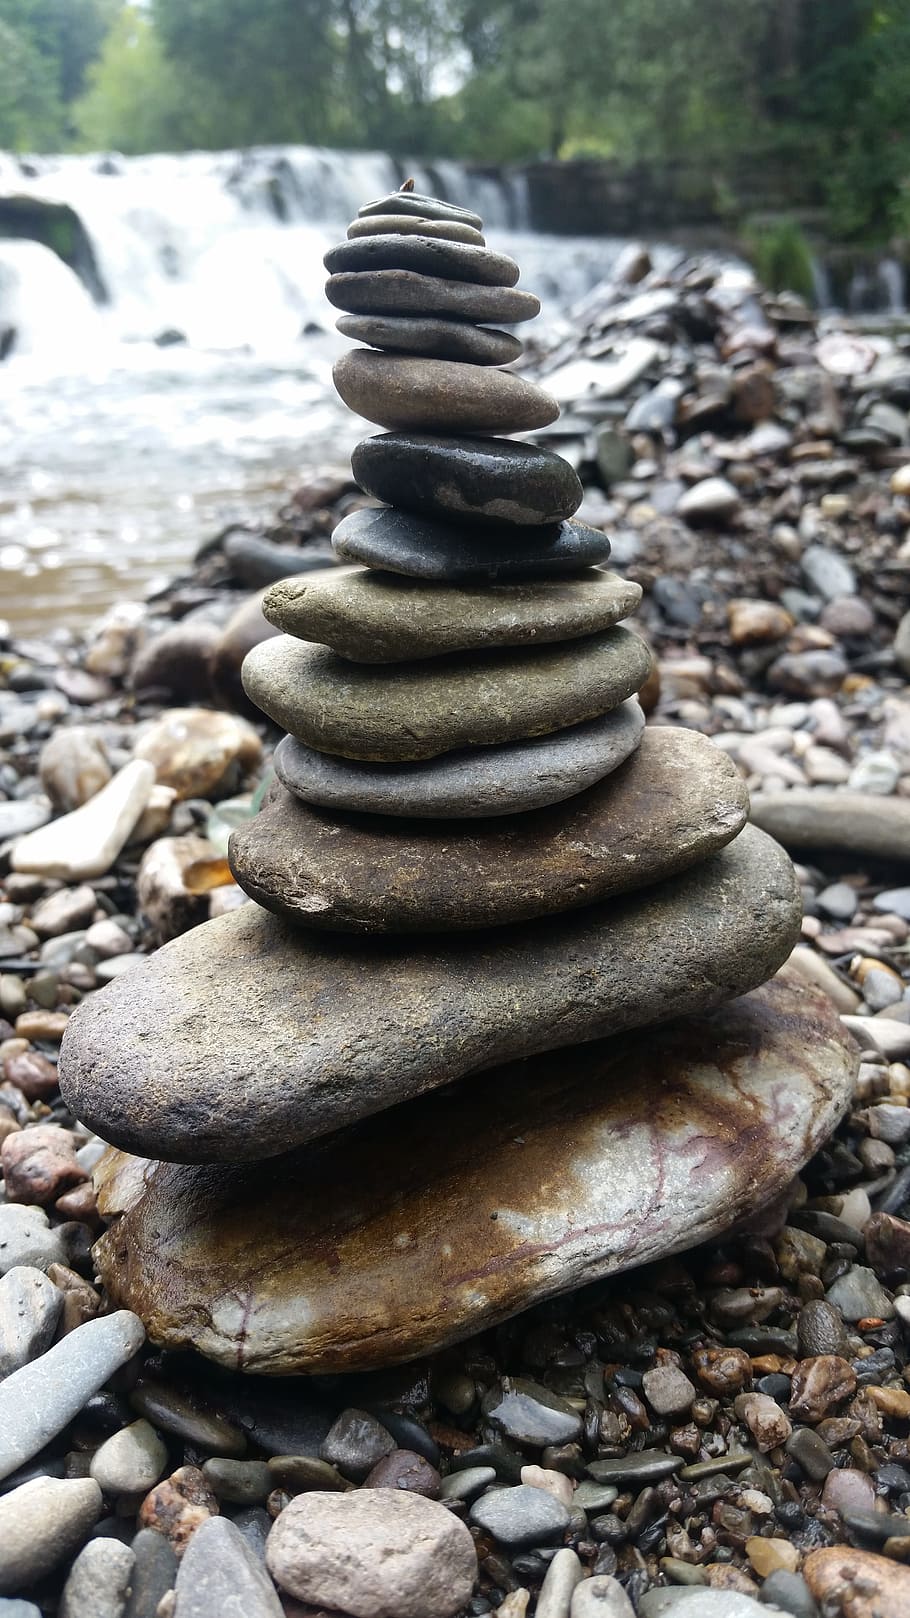 River, Stones, Tower, Weir, Water, nature, stone tower, bank, balance, zen-like